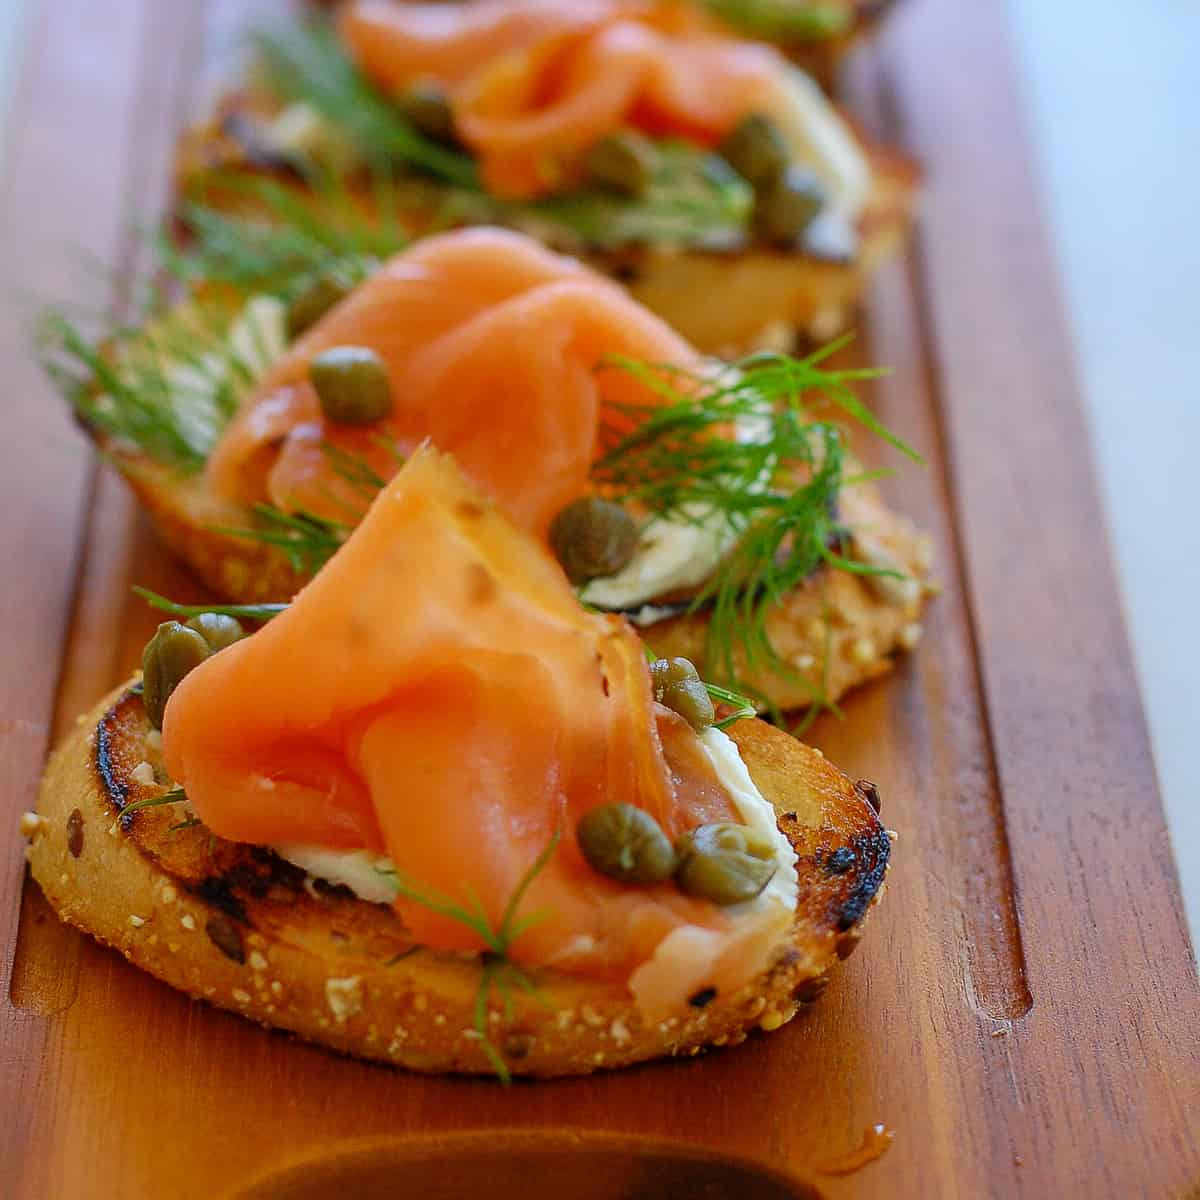 Smoked Salmon Capers Appetizer Elegant Smoked Salmon Dill and Capers Appetizer